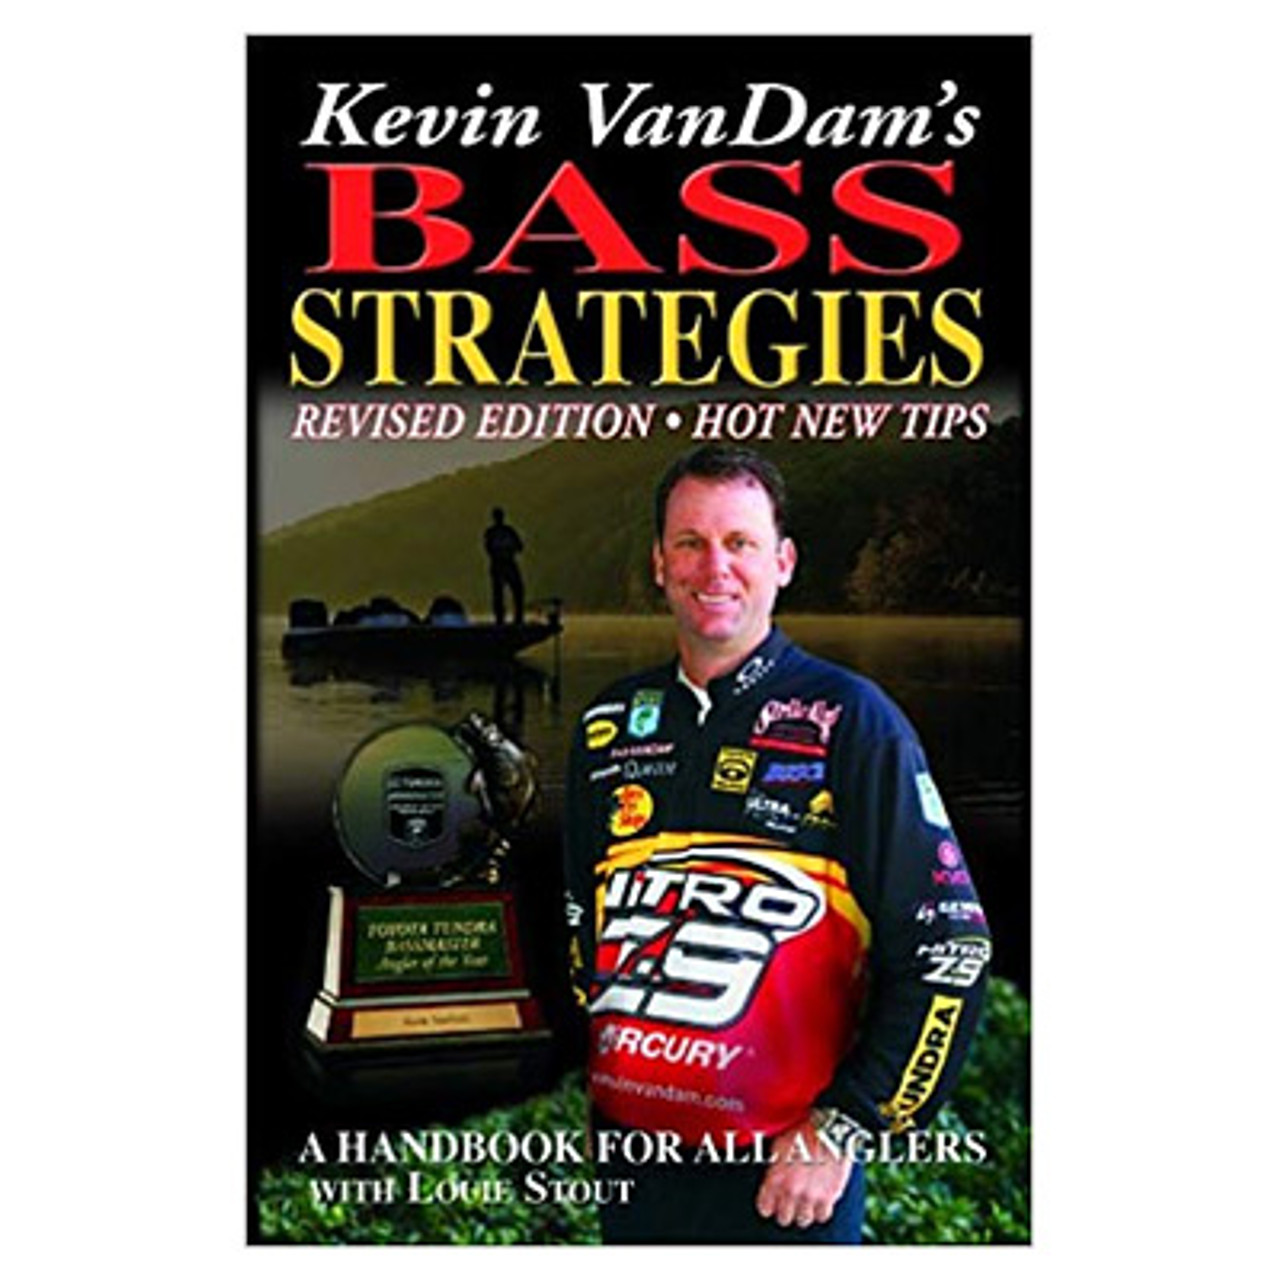 Kevin Vandam's "Bass Strategies" Revised Edition Book